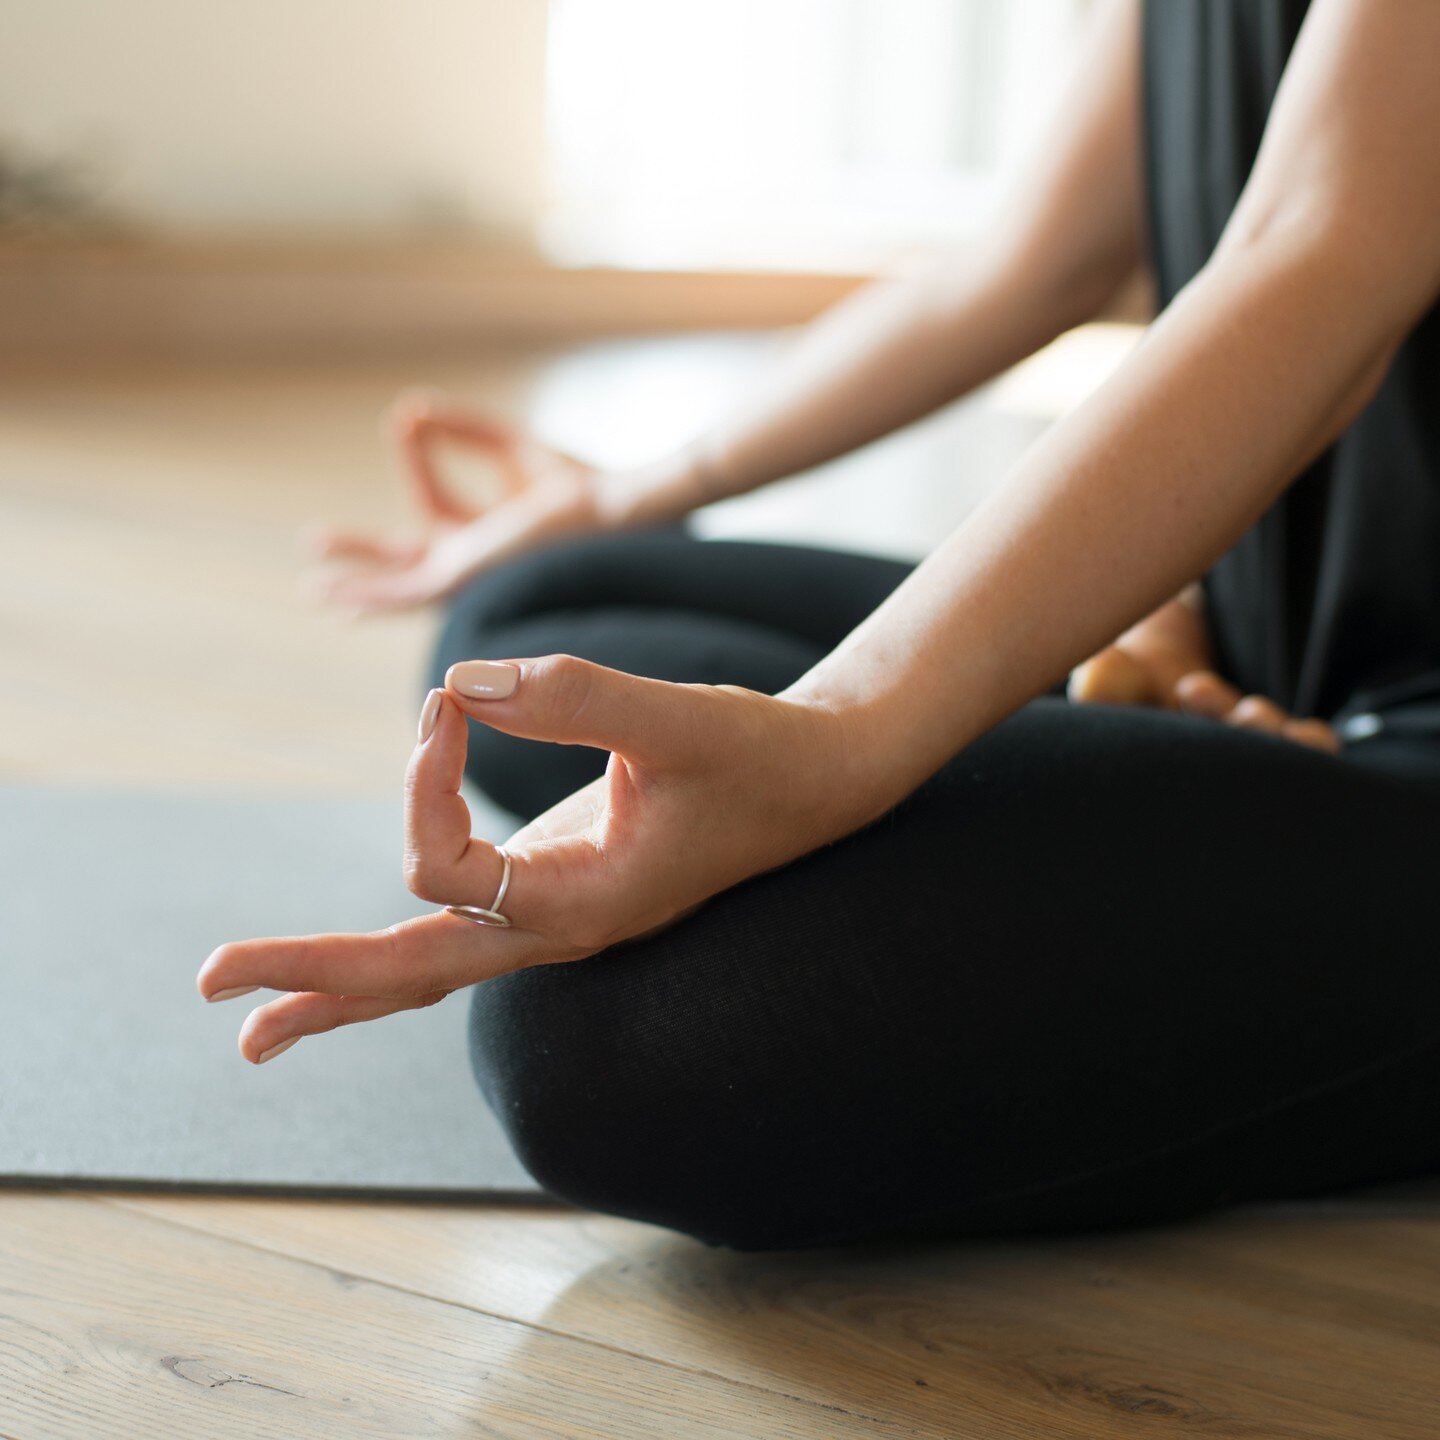 Ease yourself into the week with our Adult Yoga Classes every Sunday at 8:30 am. Our qualified instructor, Anna-Lisa Persson, will lead you through a session of mindful movement in a supportive environment that is suitable for all levels.

Book your 